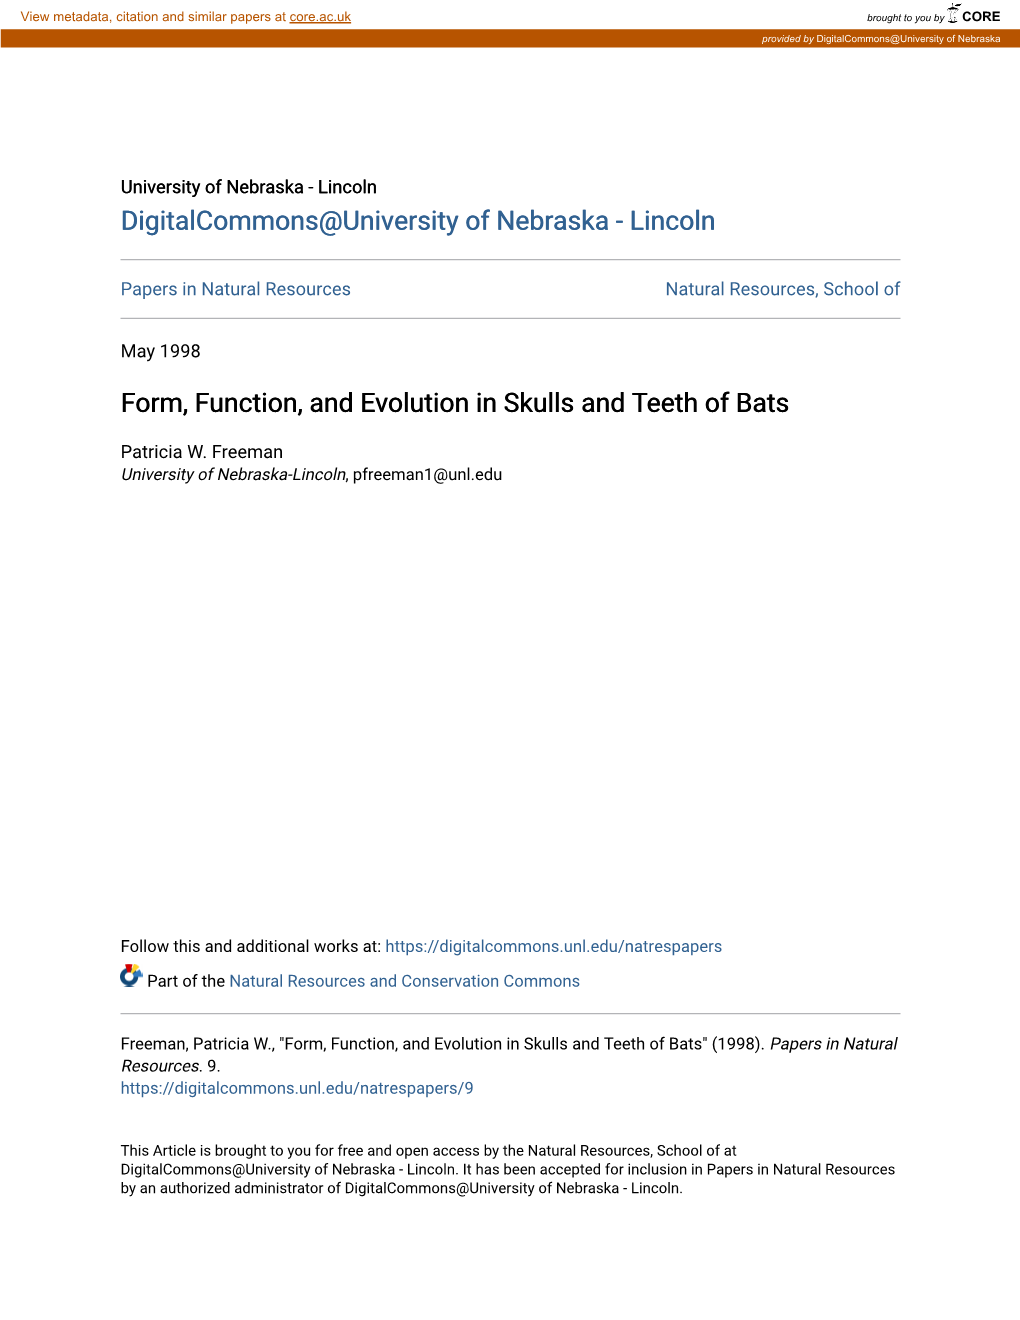 Form, Function, and Evolution in Skulls and Teeth of Bats